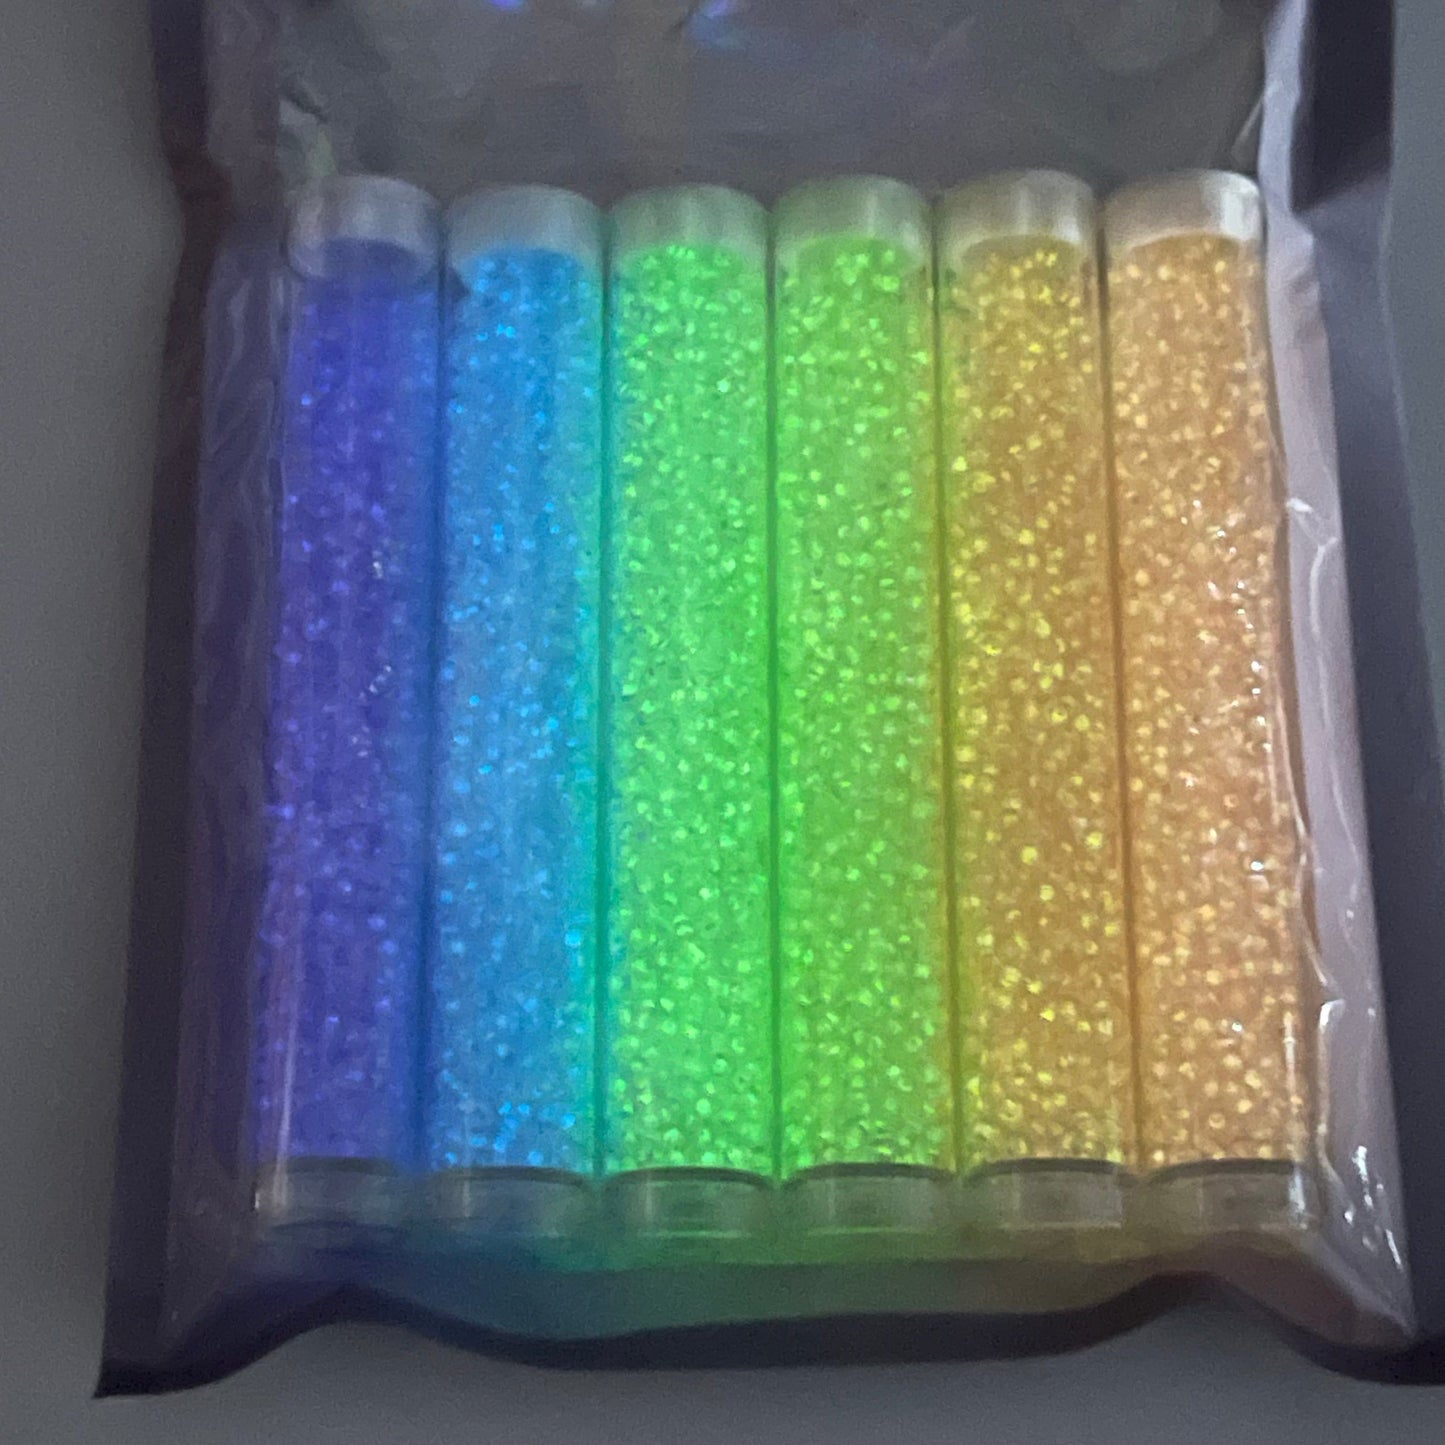 NEON GLOW IN DARK SET, 11/0 Seedbeads in 10G x 6 colours, BLACK FRIDAY PROMO Promotions